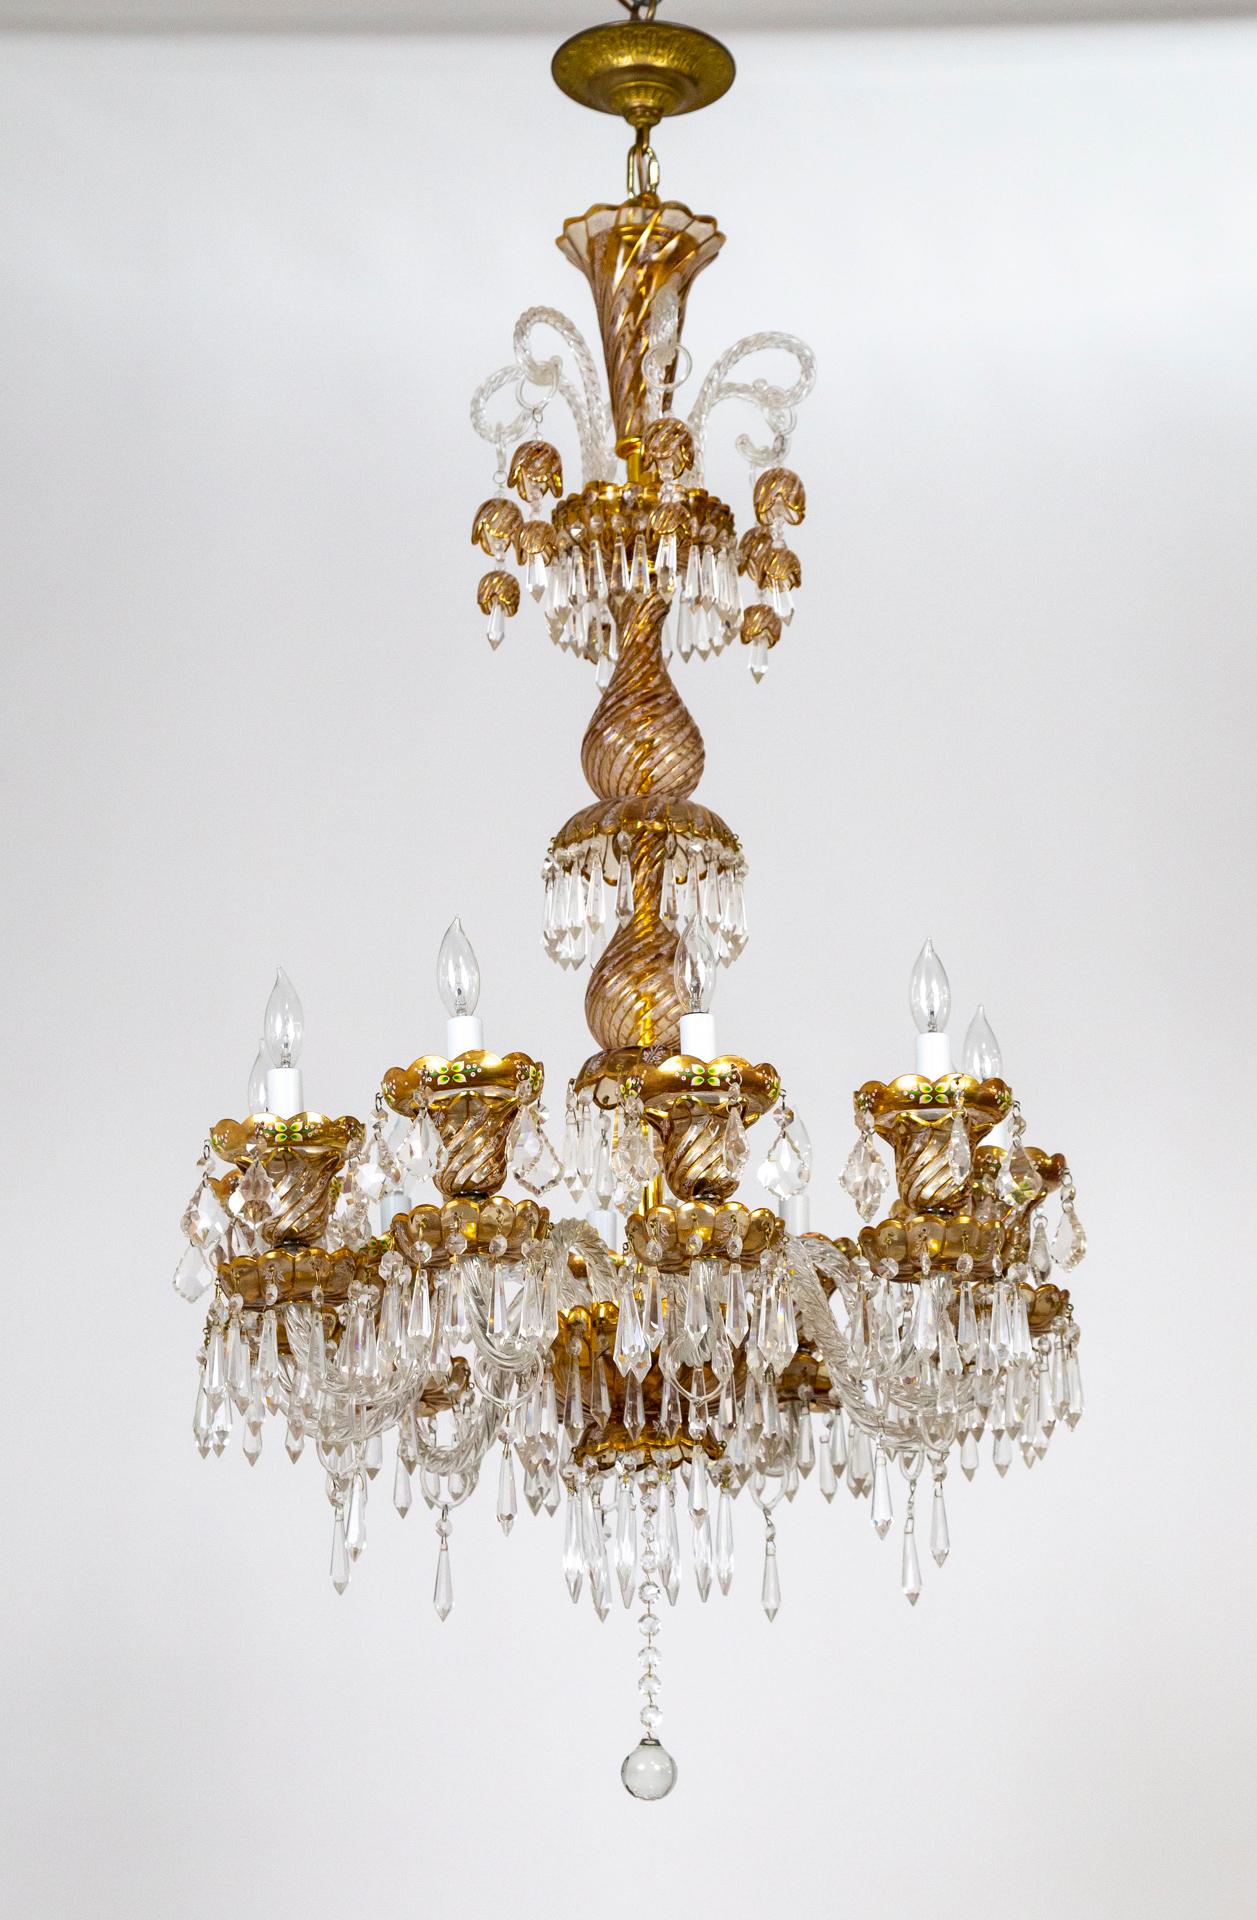 Enchanting, 10 arm Bohemian glass chandelier.
Hand blown clear glass twisted arms and body. Hand enameled ornate detailing with floral motifs, 24kt gold embellishments. Faceted crystal spears, pendalogues and double bells. The elongated body is